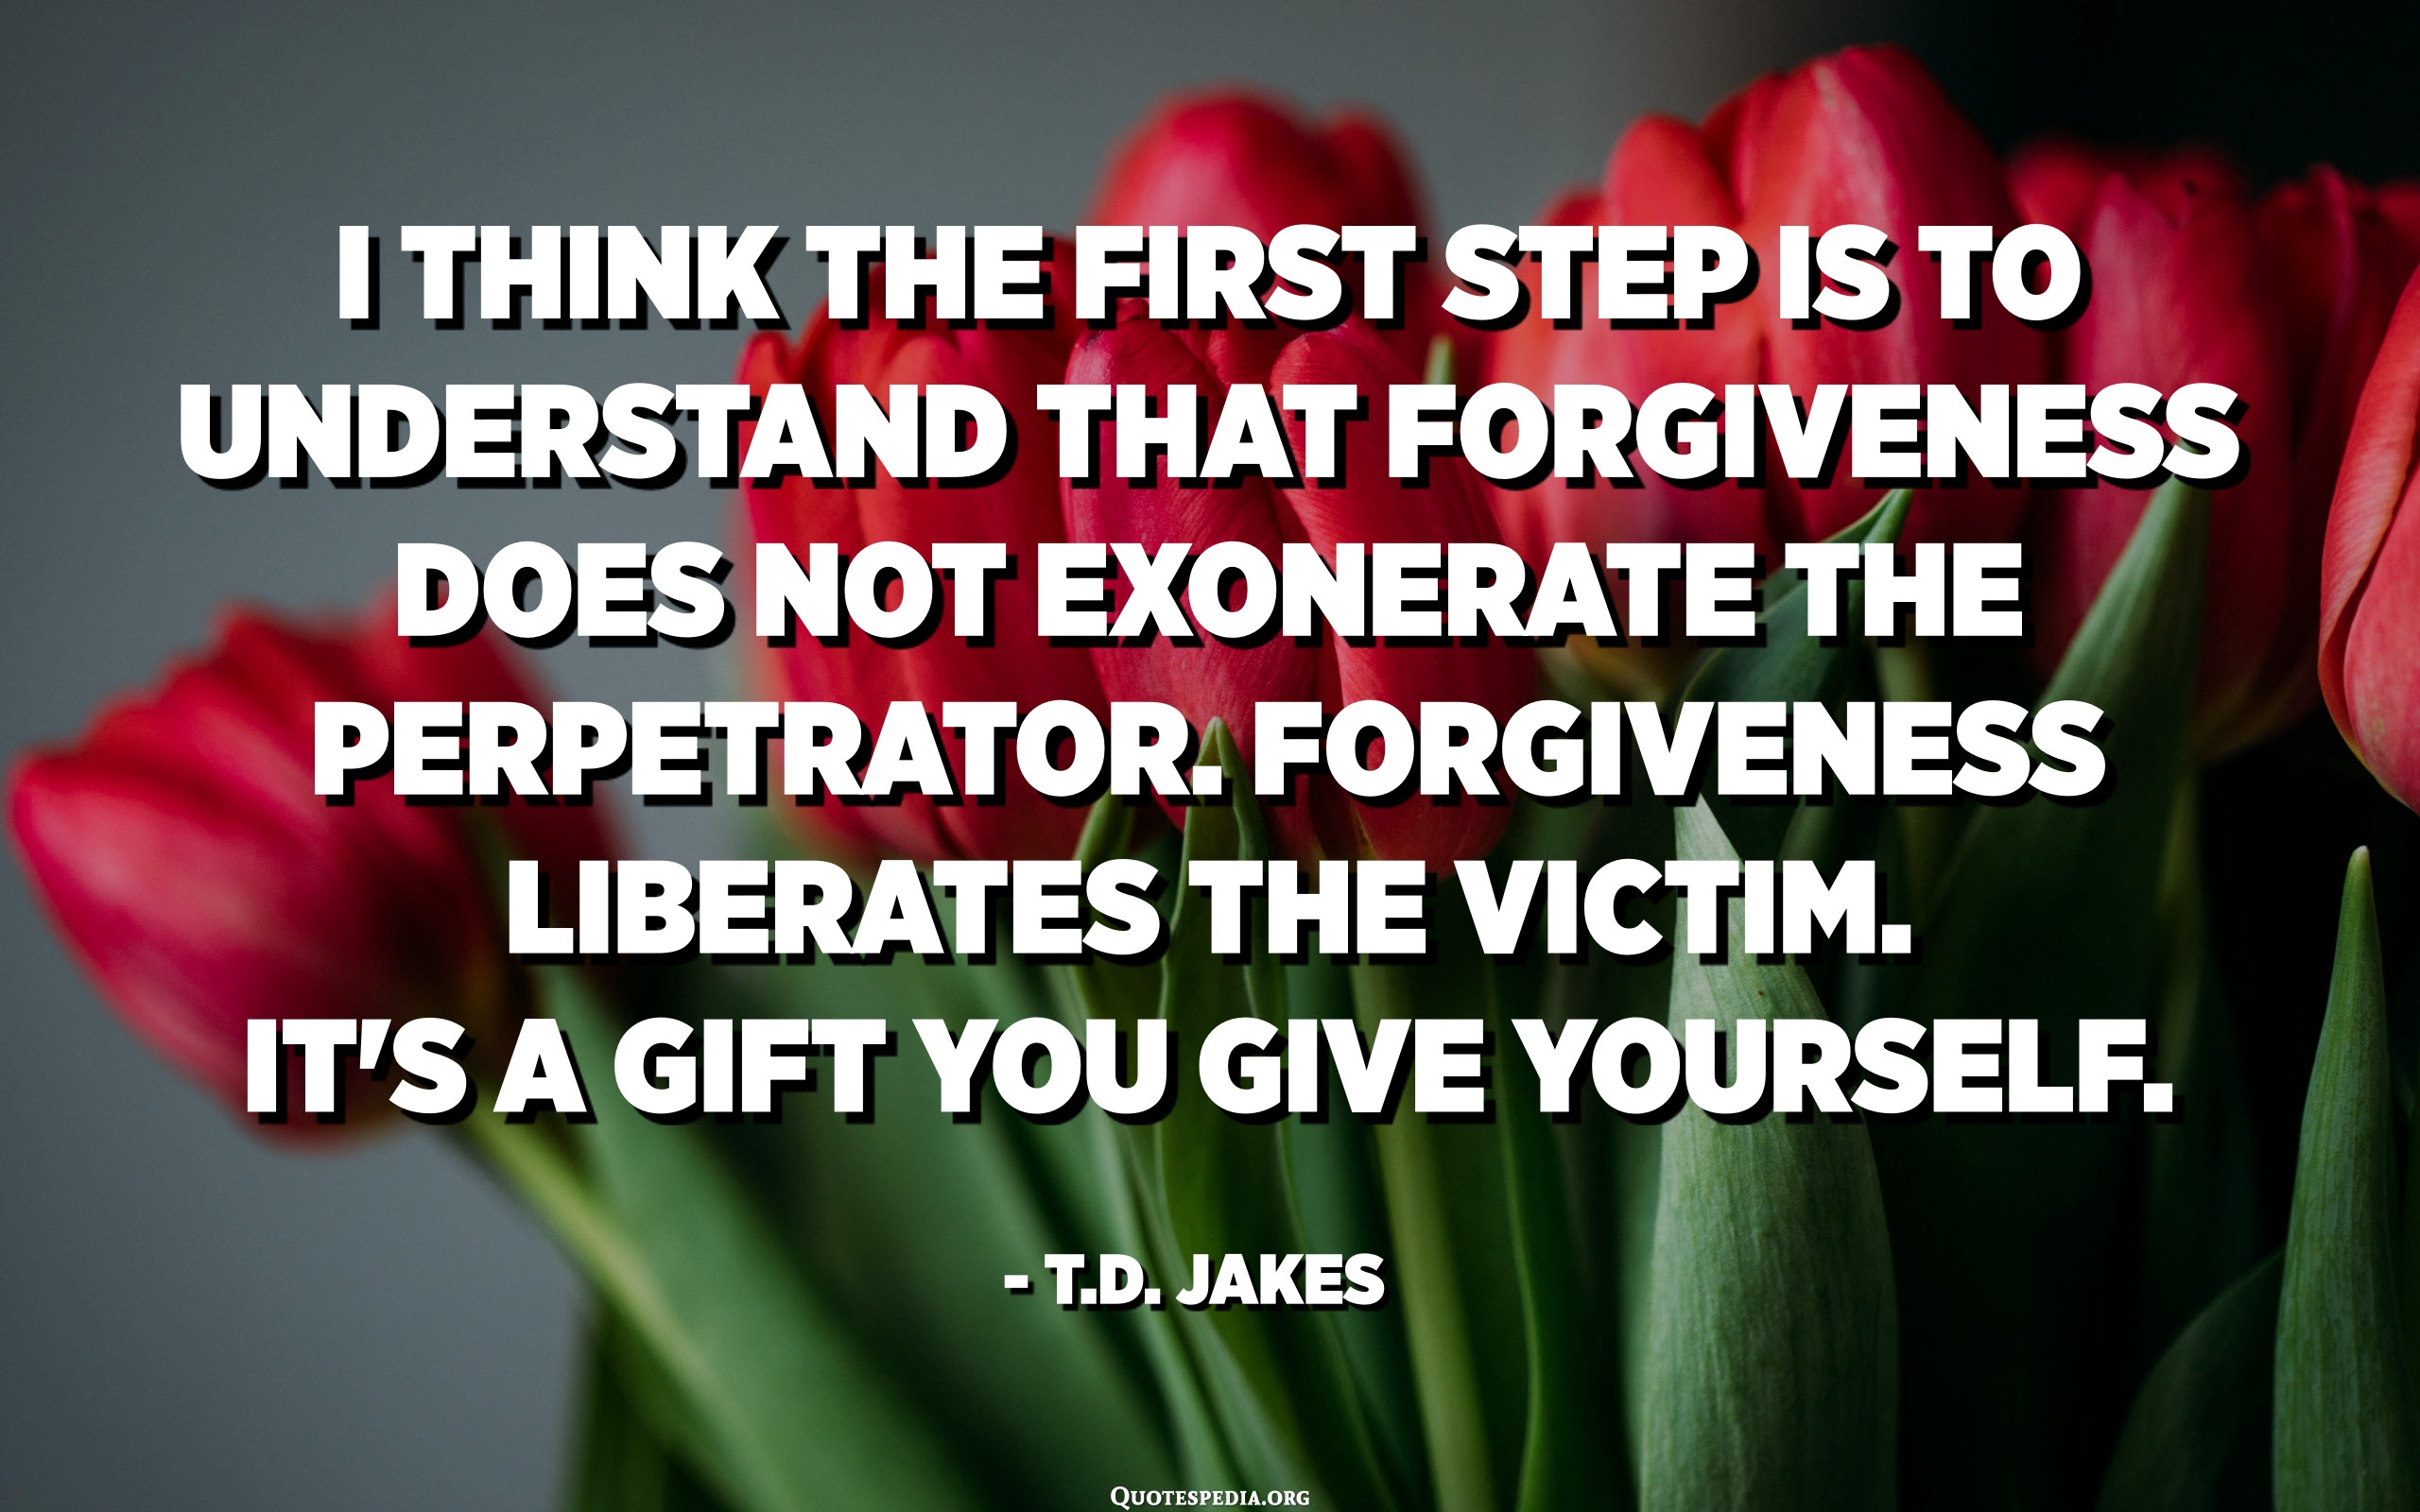 I think the first step is to understand that forgiveness does not exonerate  the perpetrator. Forgiveness liberates the victim. It's a gift you give  yourself. - T.D. Jakes - Quotespedia.org